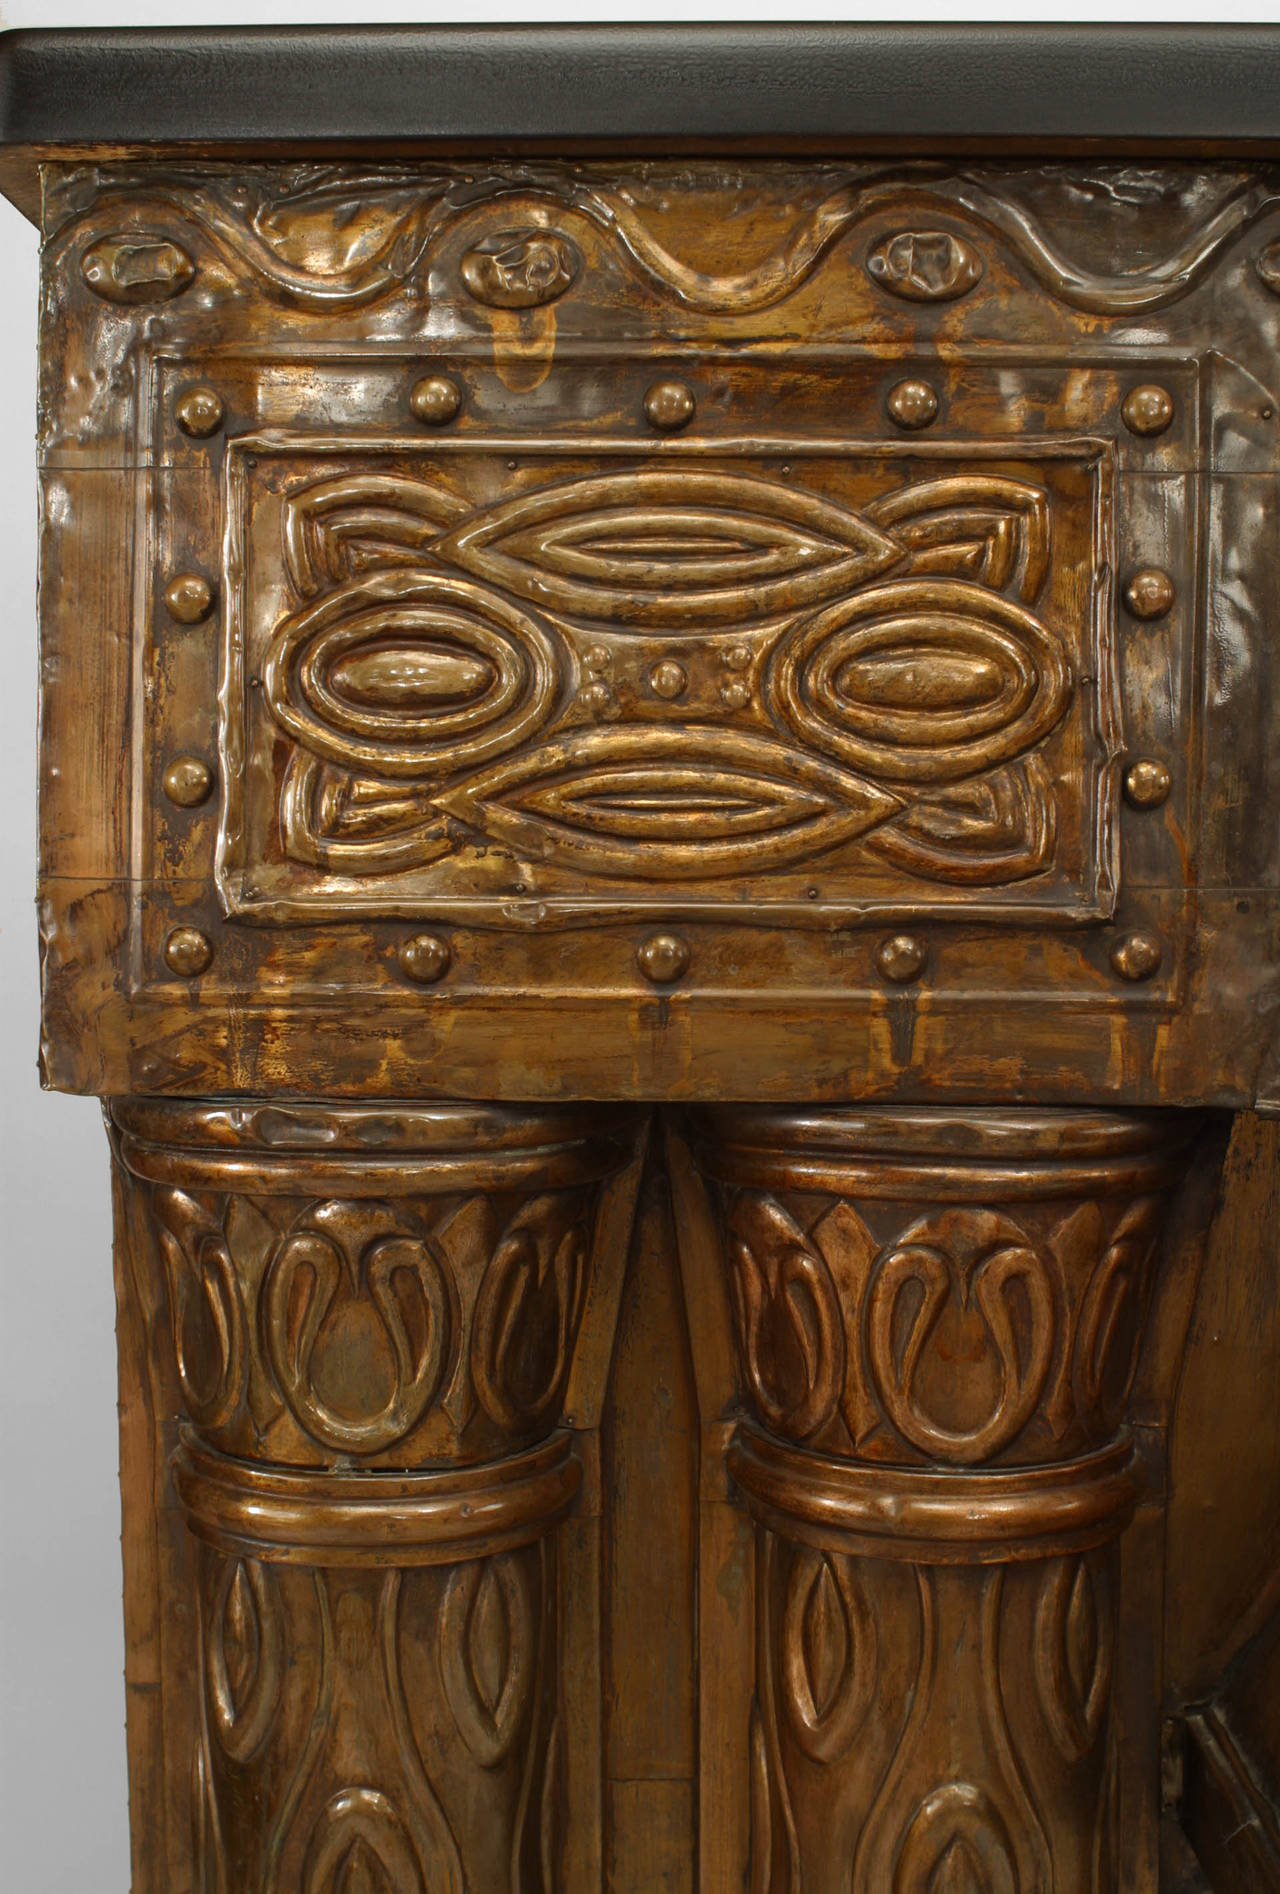 Austrian Secessionist Embossed Brass Fireplace In Excellent Condition For Sale In New York, NY